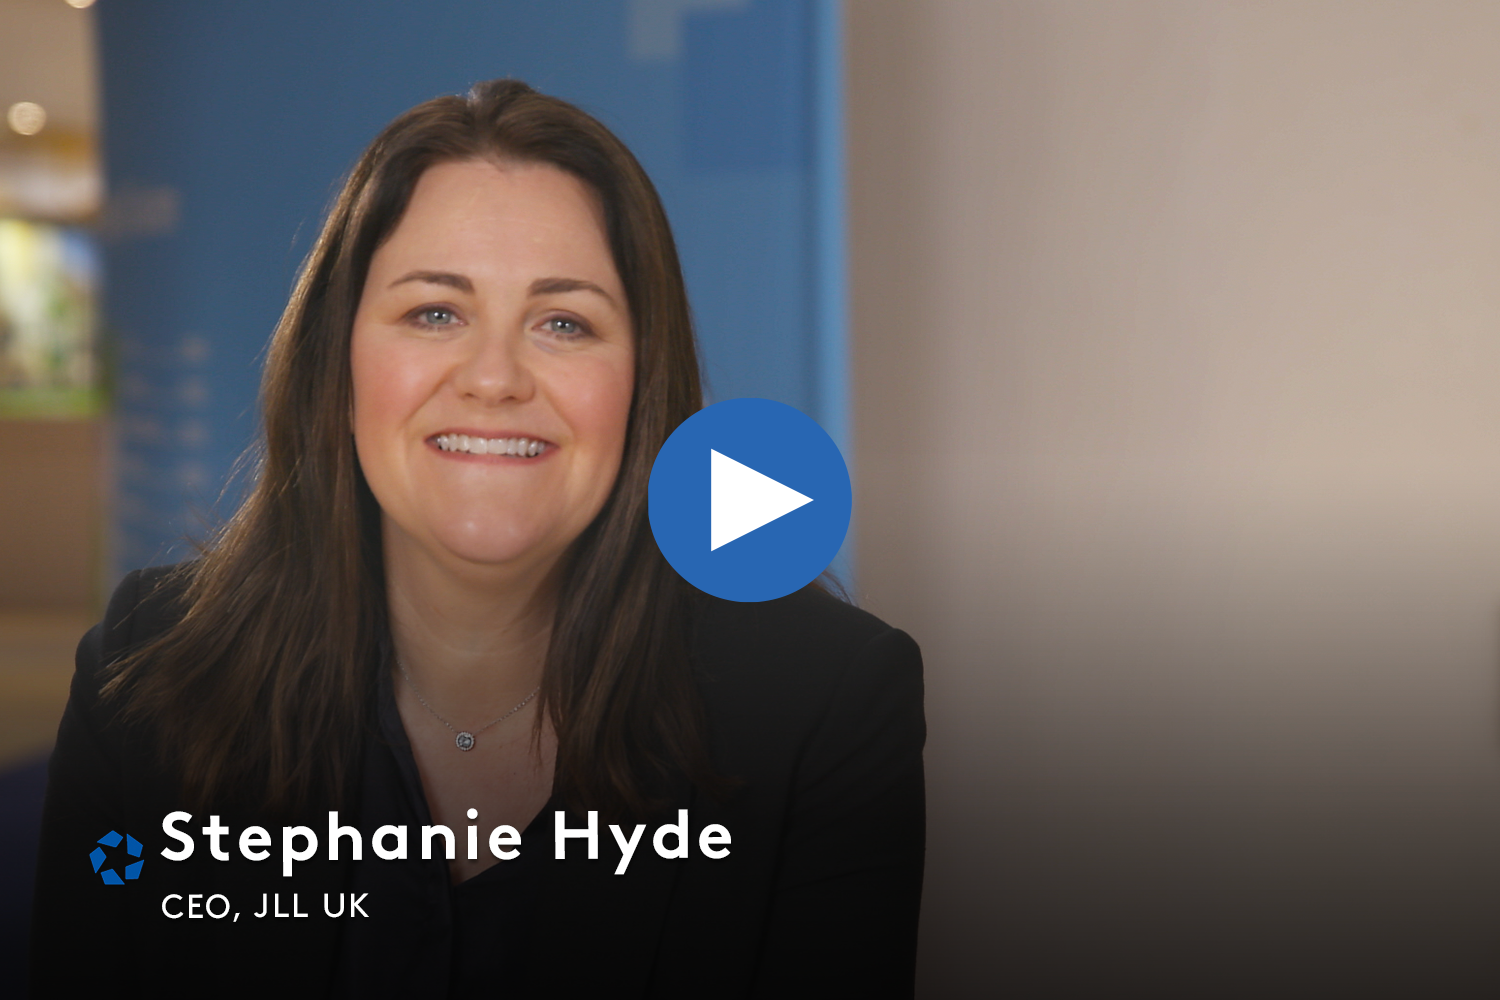 JLL's Chief Executive, UK, Stephanie Hyde on Pricing, a More Niche Market and 'Brown Penalties'